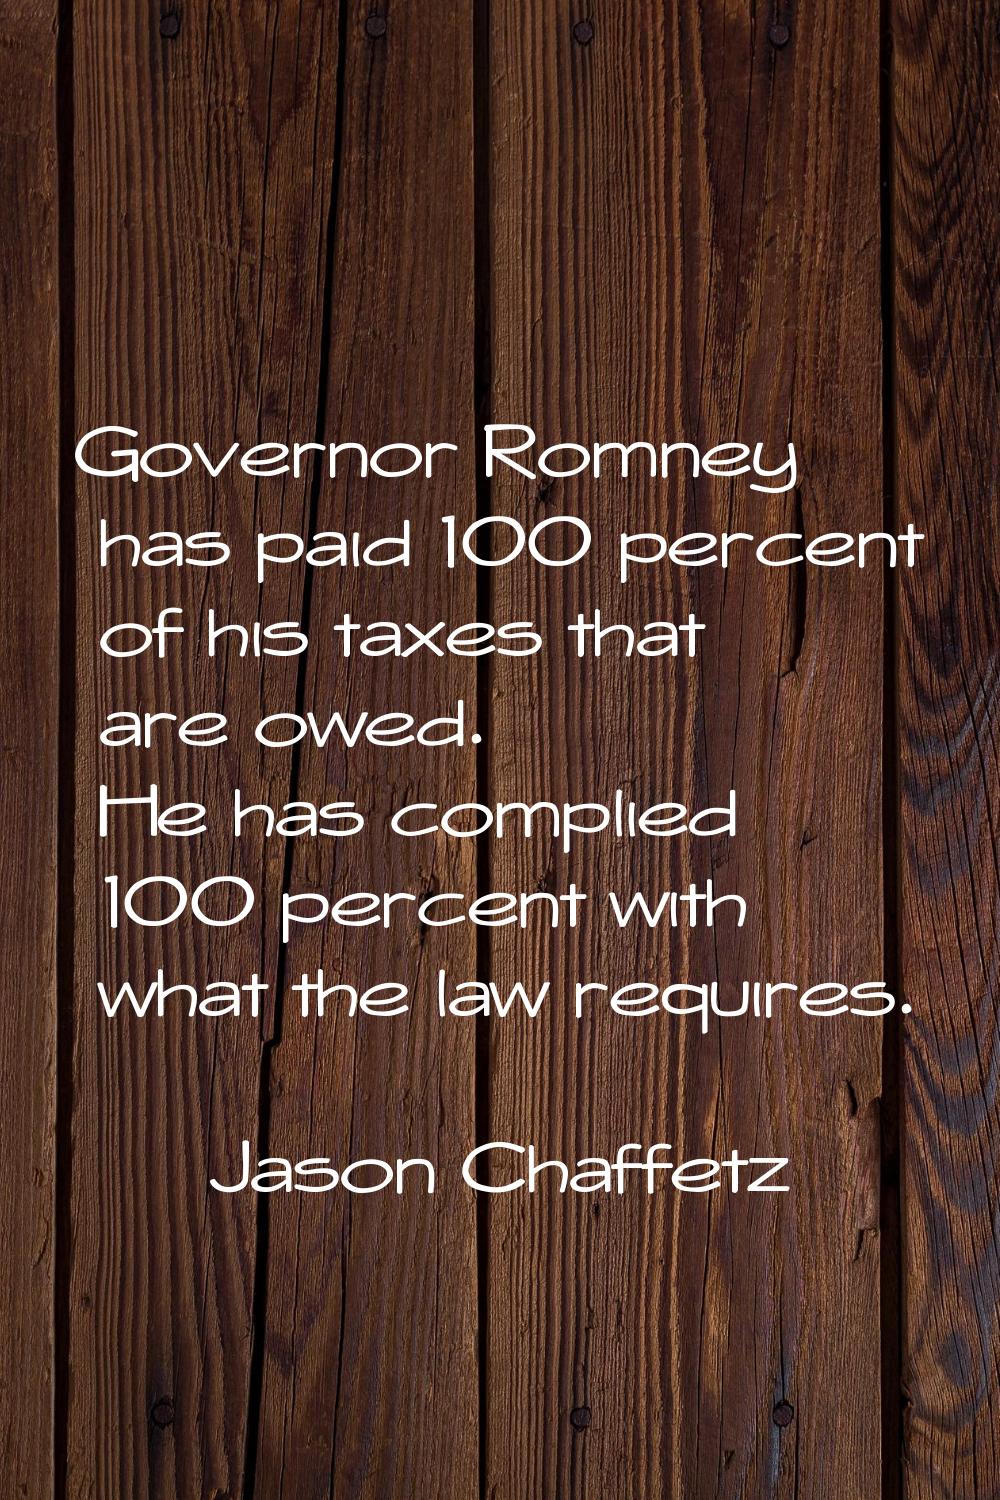 Governor Romney has paid 100 percent of his taxes that are owed. He has complied 100 percent with w